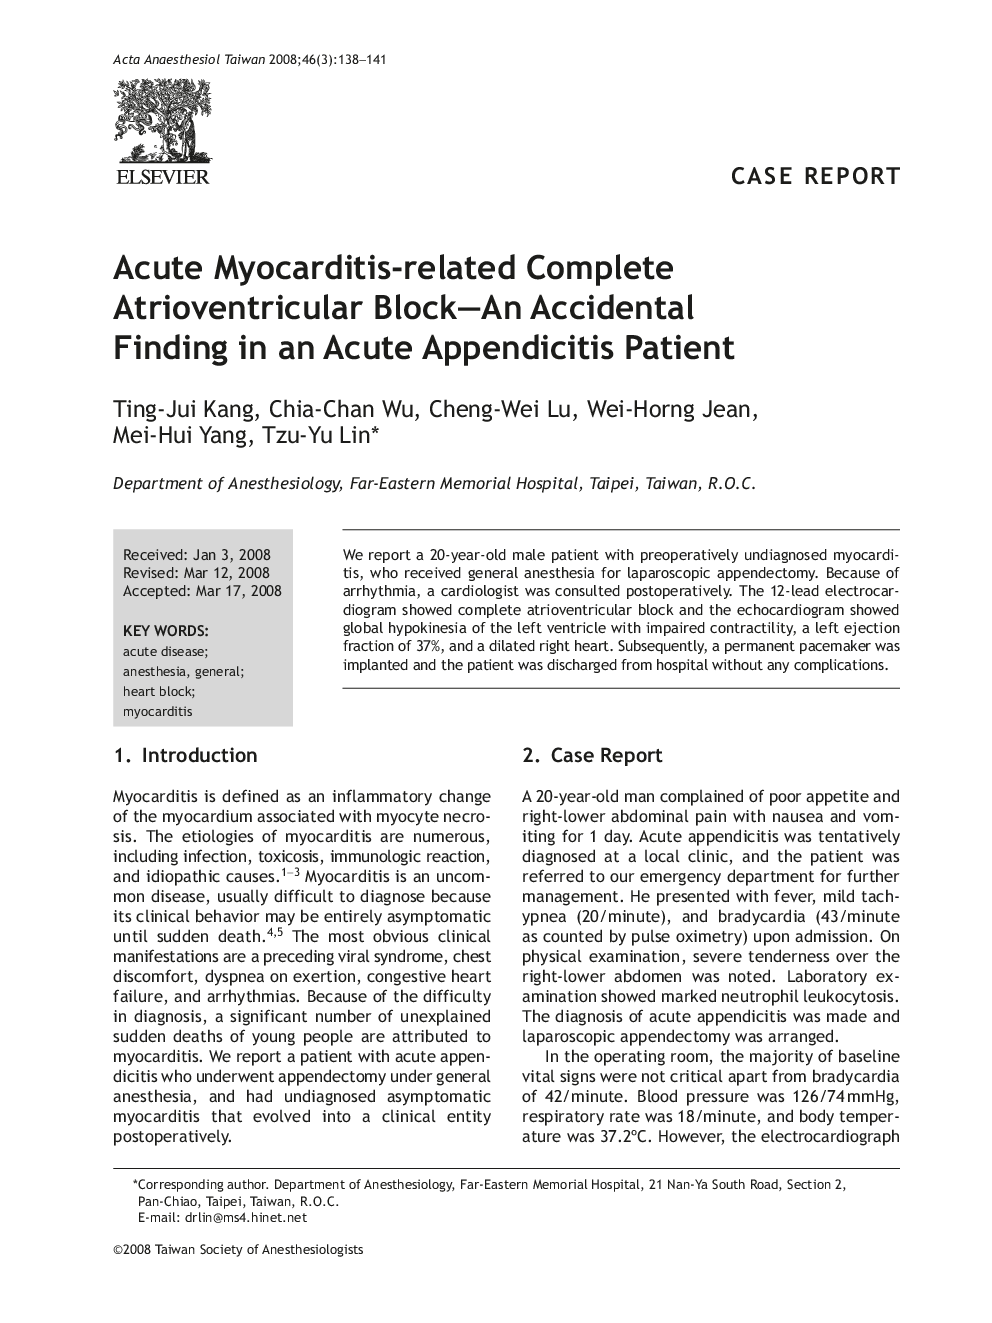 Acute Myocarditis-related Complete Atrioventricular Block—An Accidental Finding in an Acute Appendicitis Patient